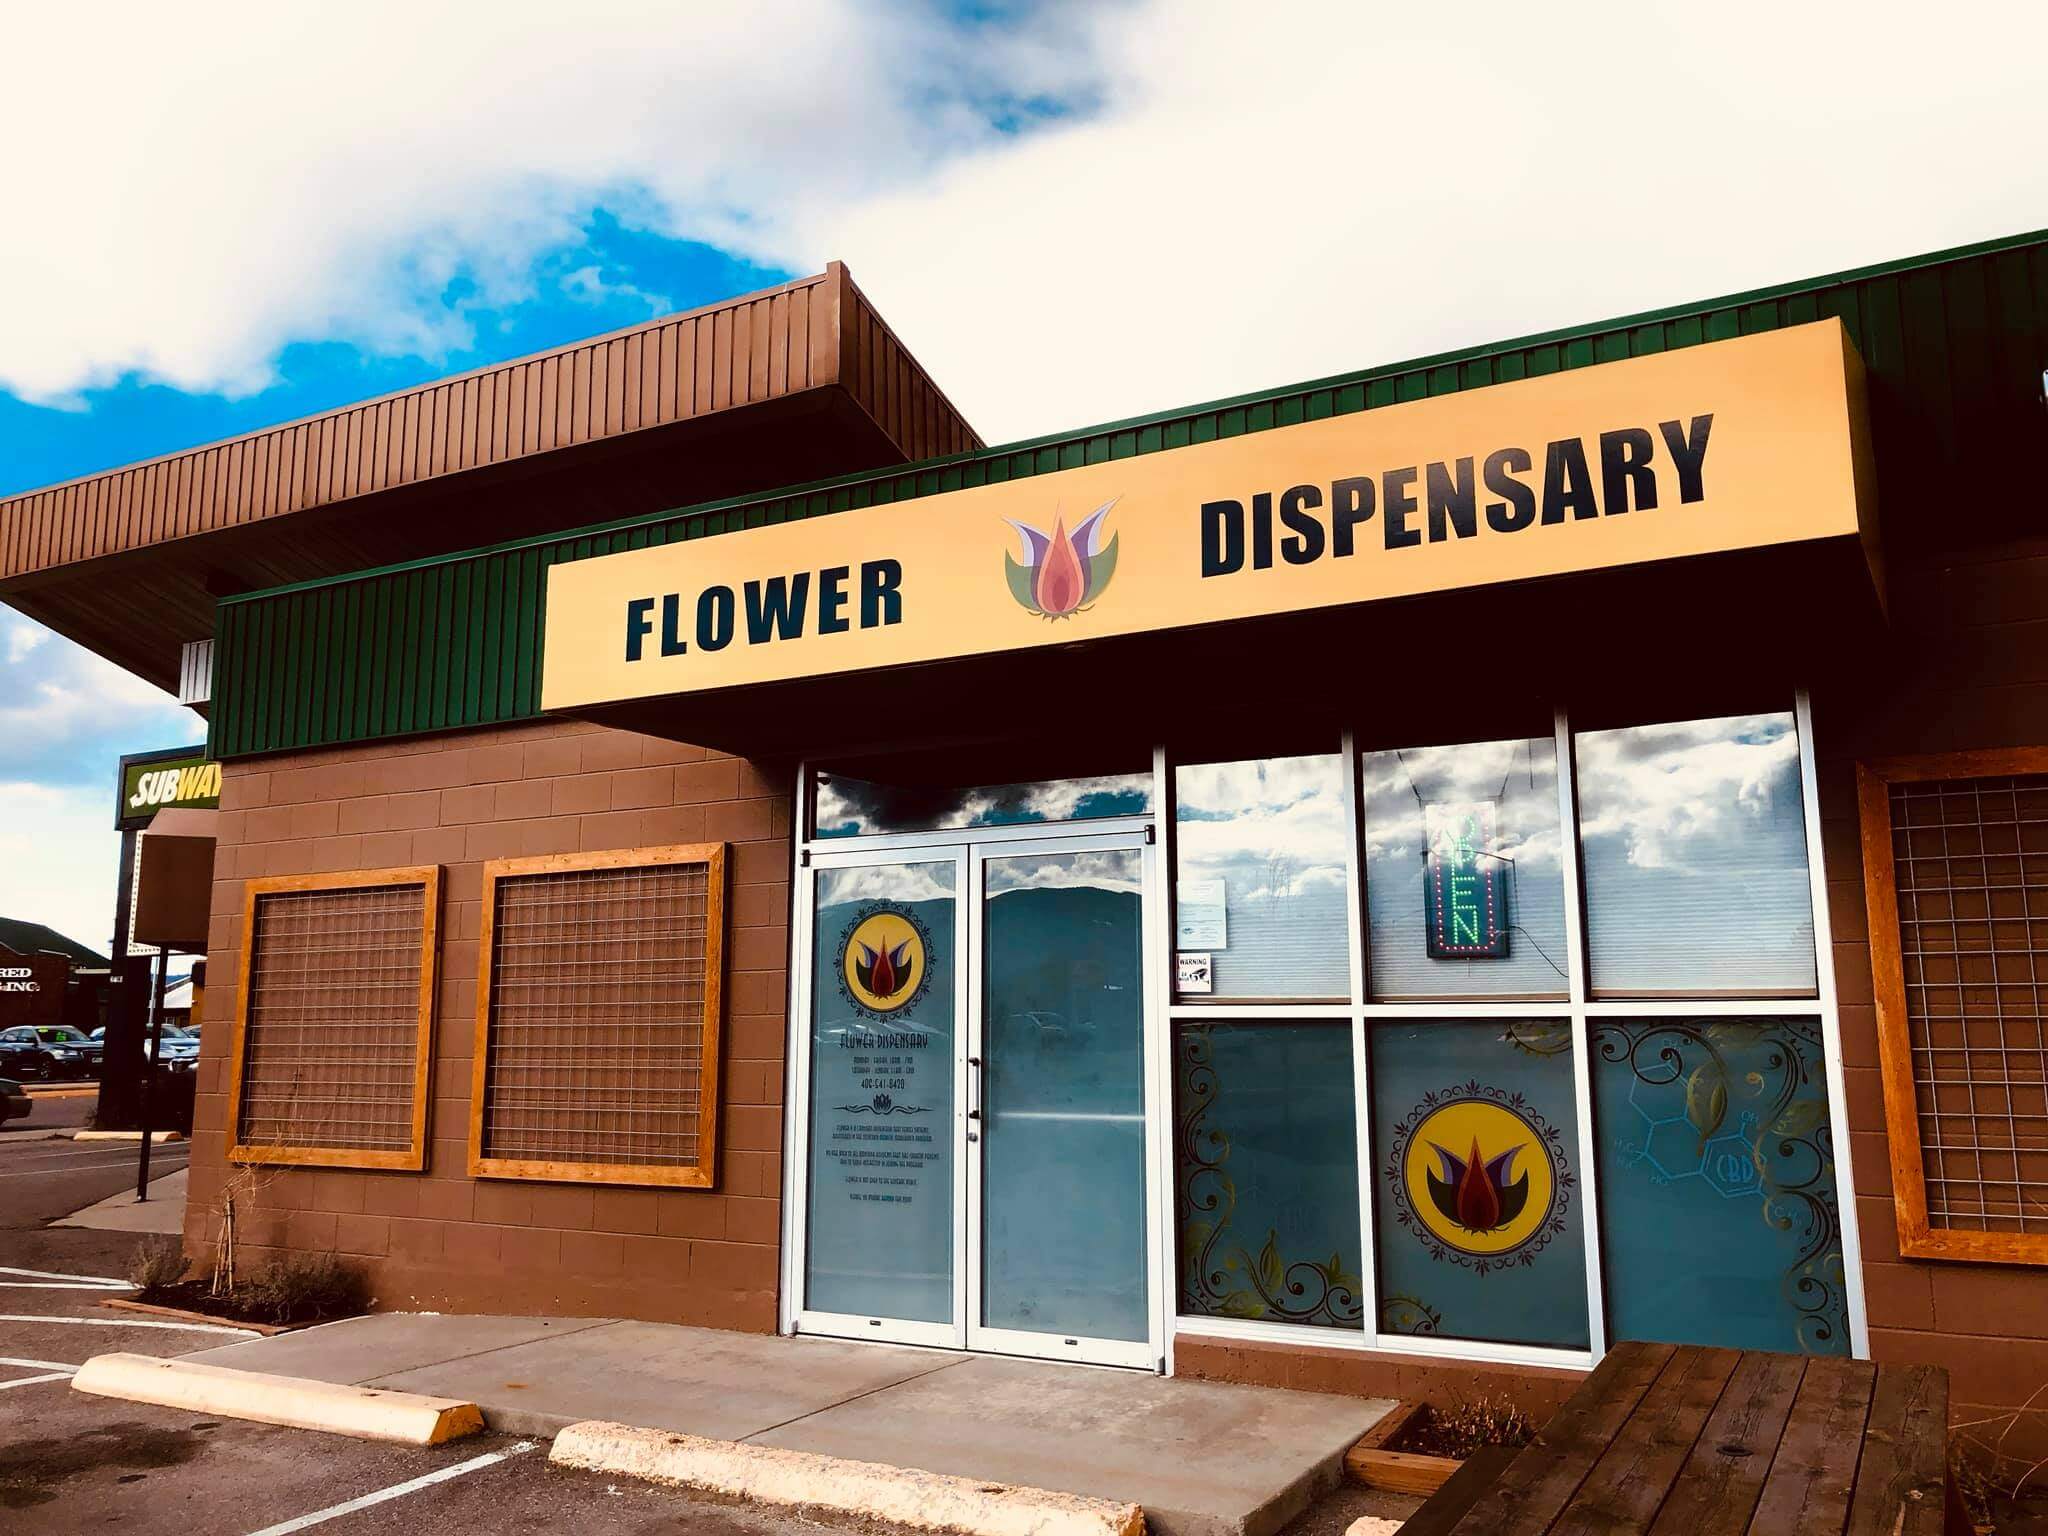 The outside of the Flower Dispensary in Missoula Montana